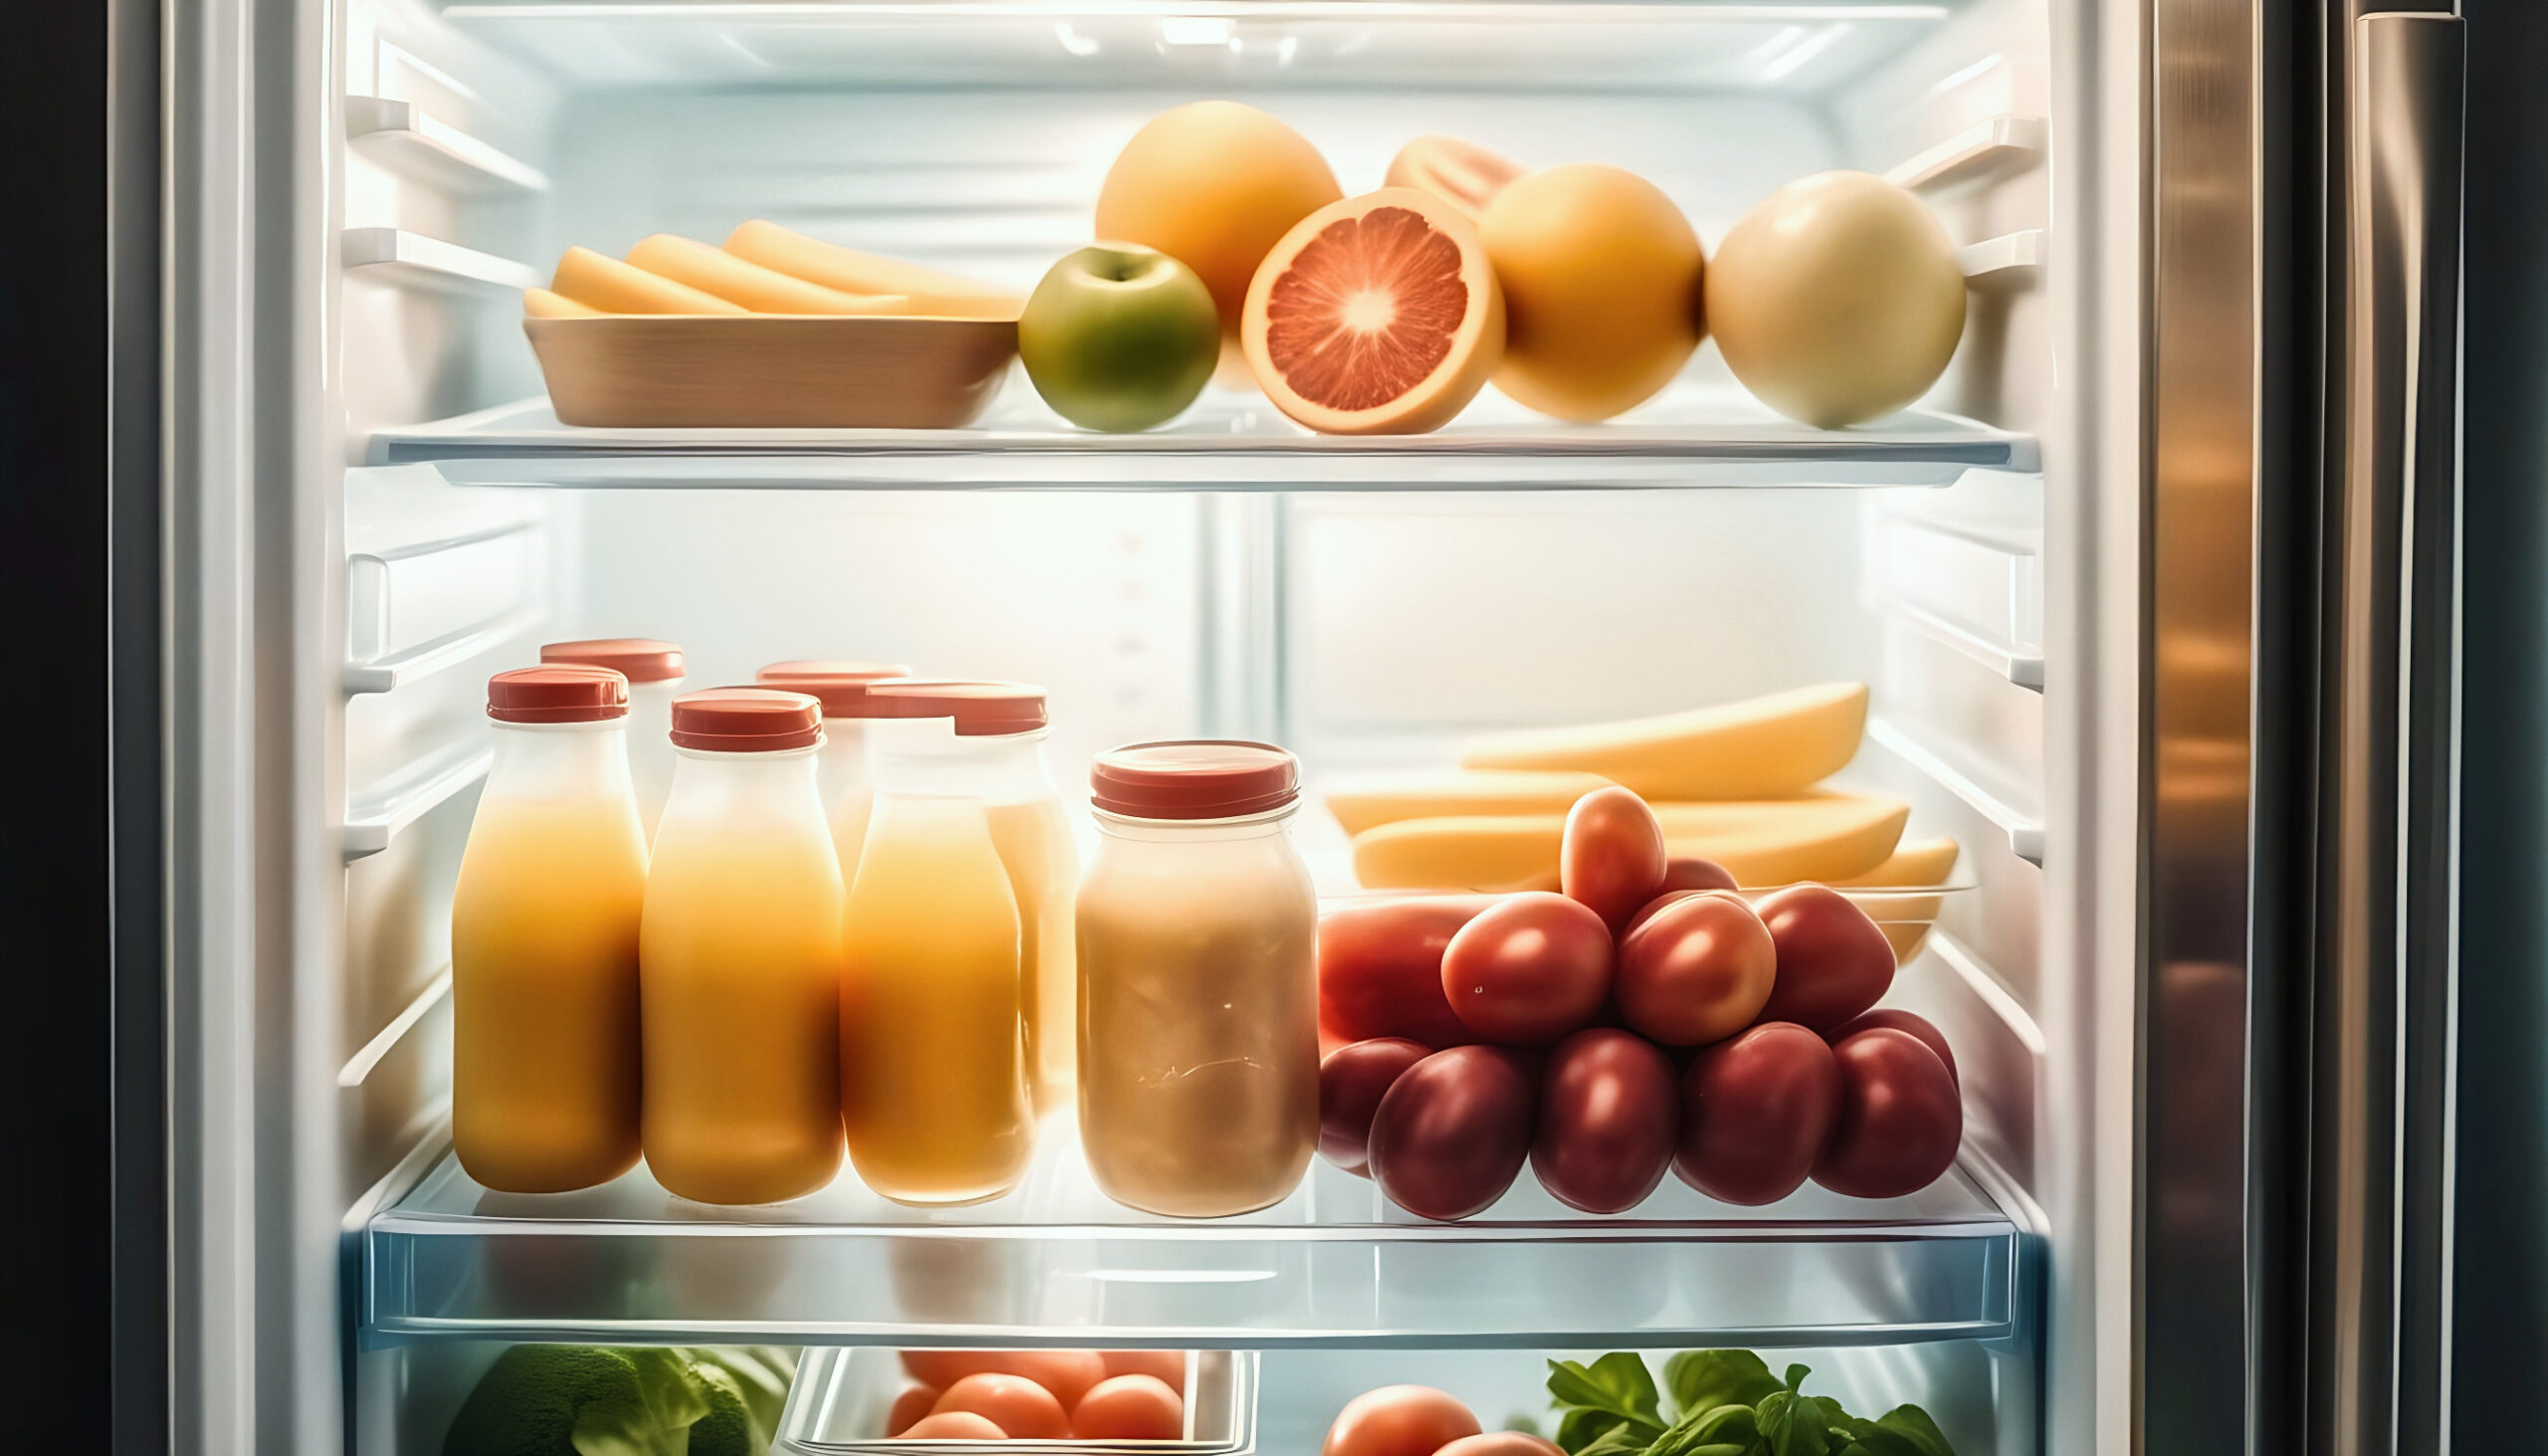 Commercial Refrigerator Maintenance and Repair Services in Pflugerville